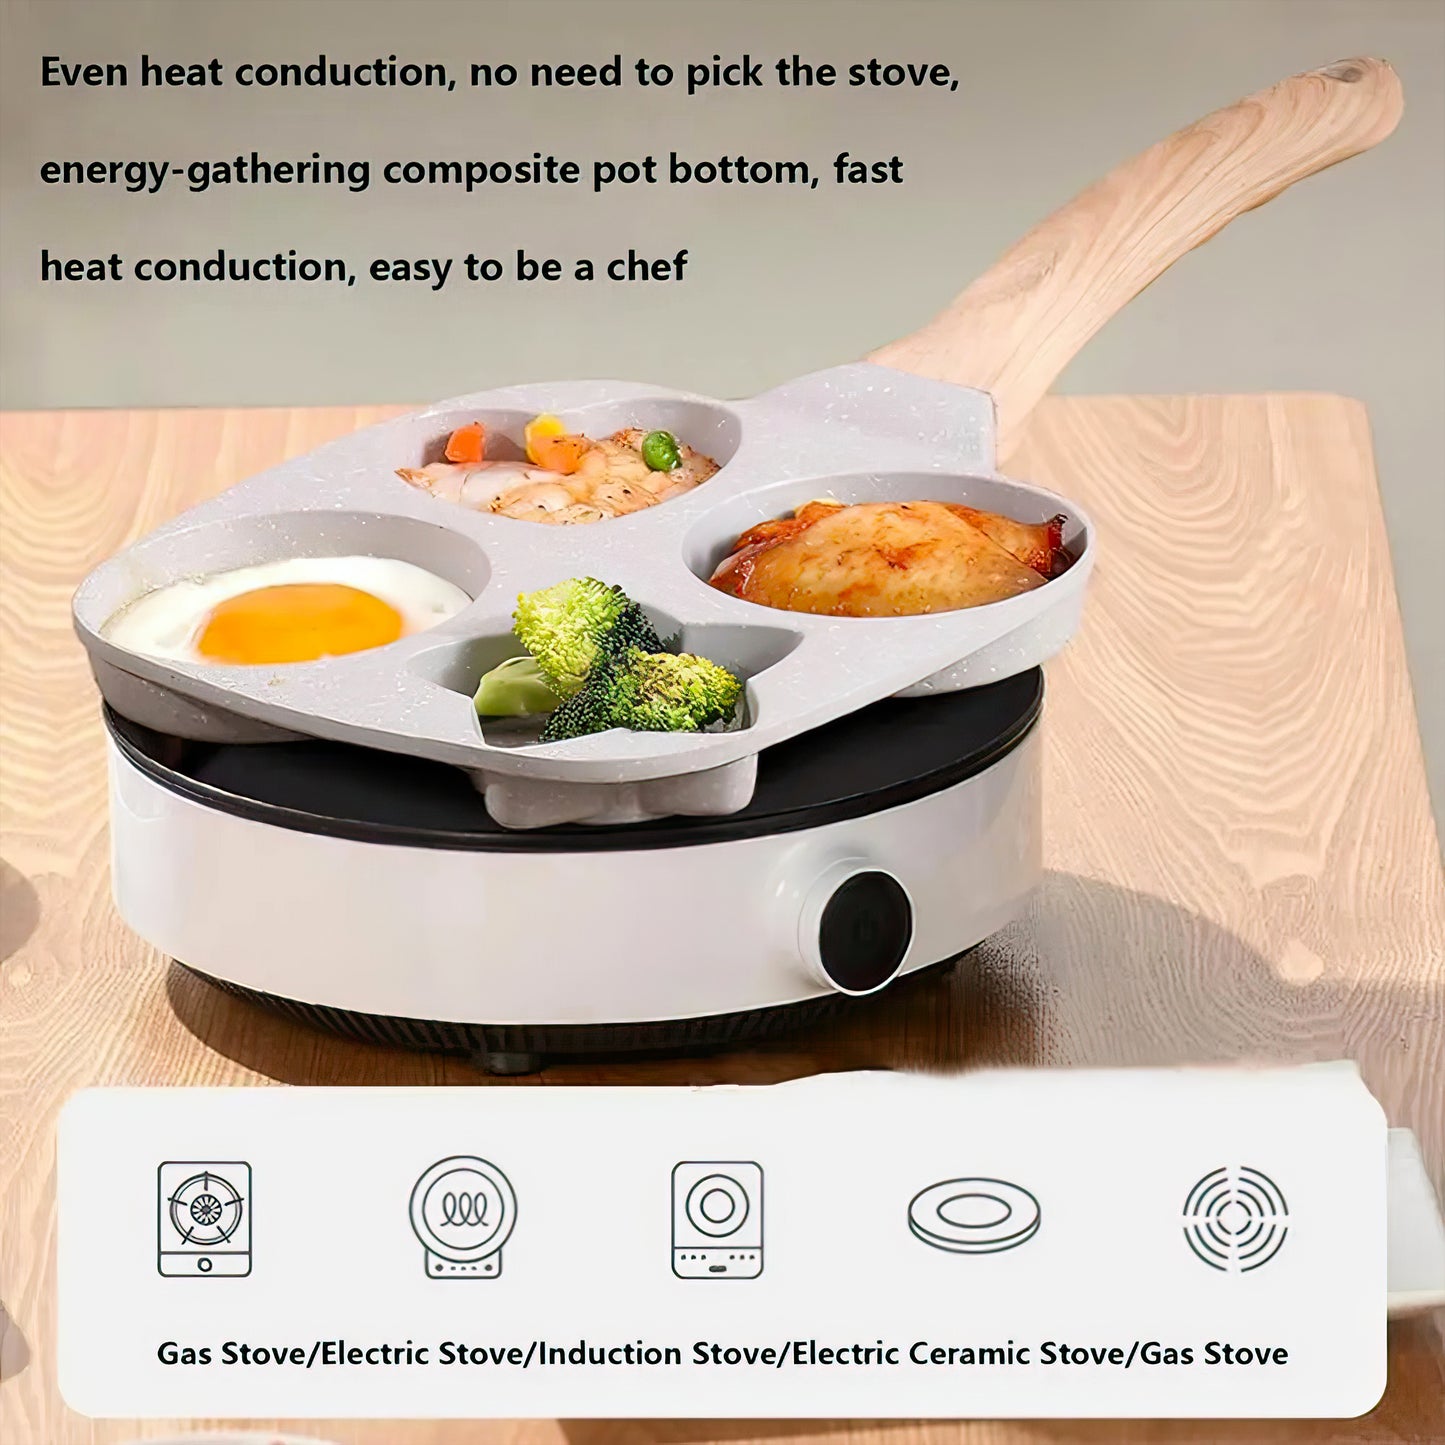 4 in 1 Frypan with wooden handle for Smart Cooking